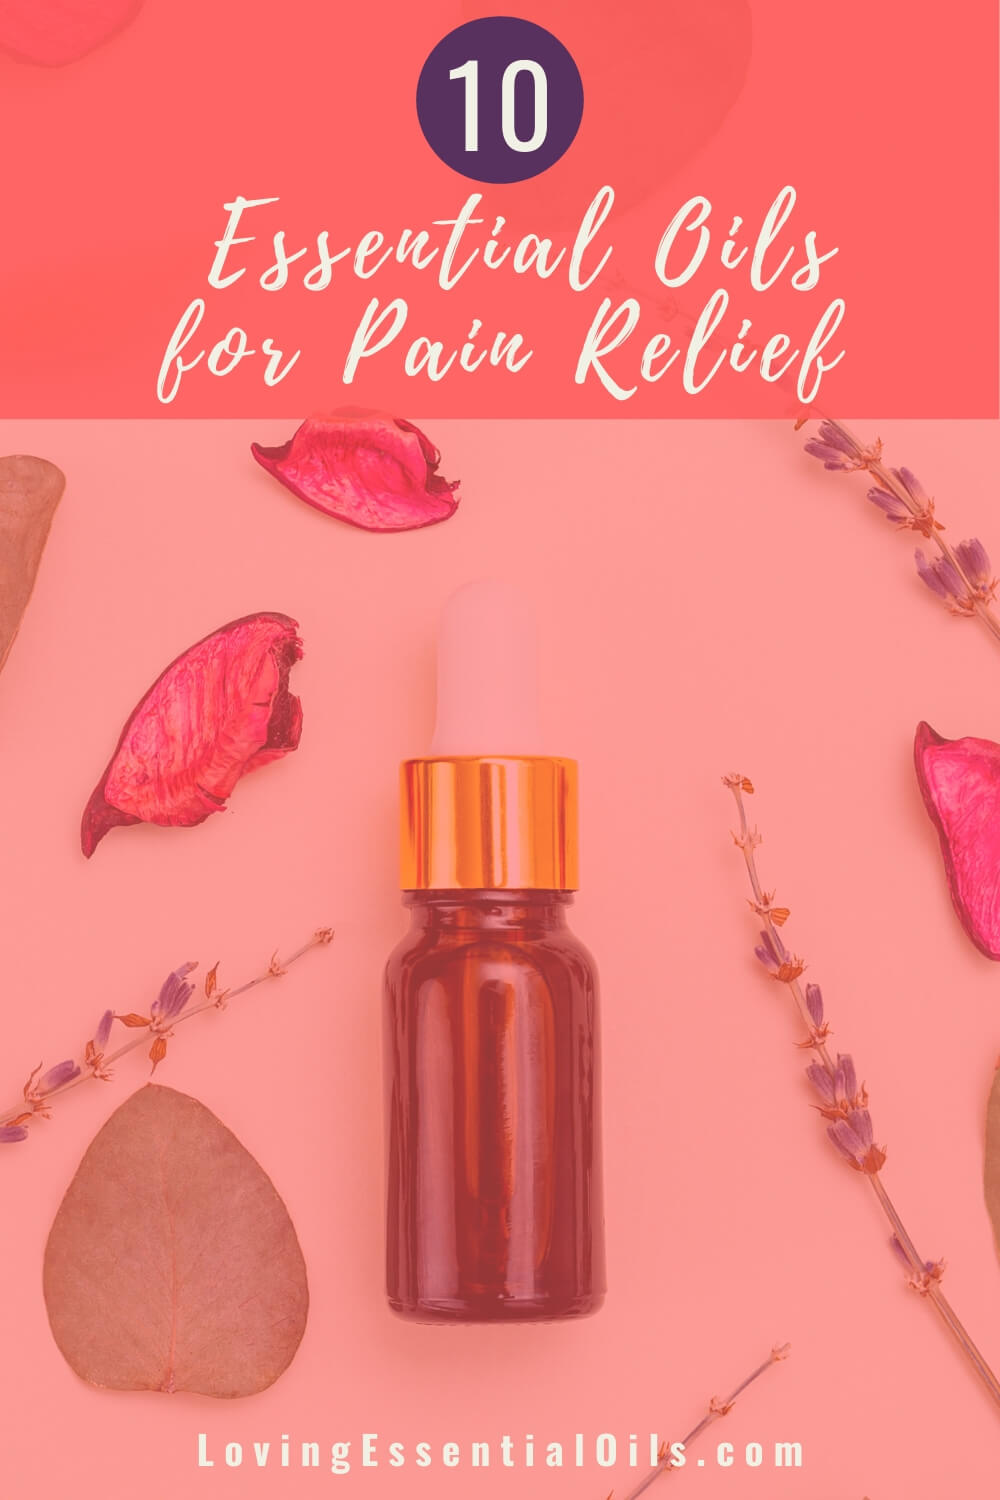 Pain Relieving Essential Oils by Loving Essential Oils